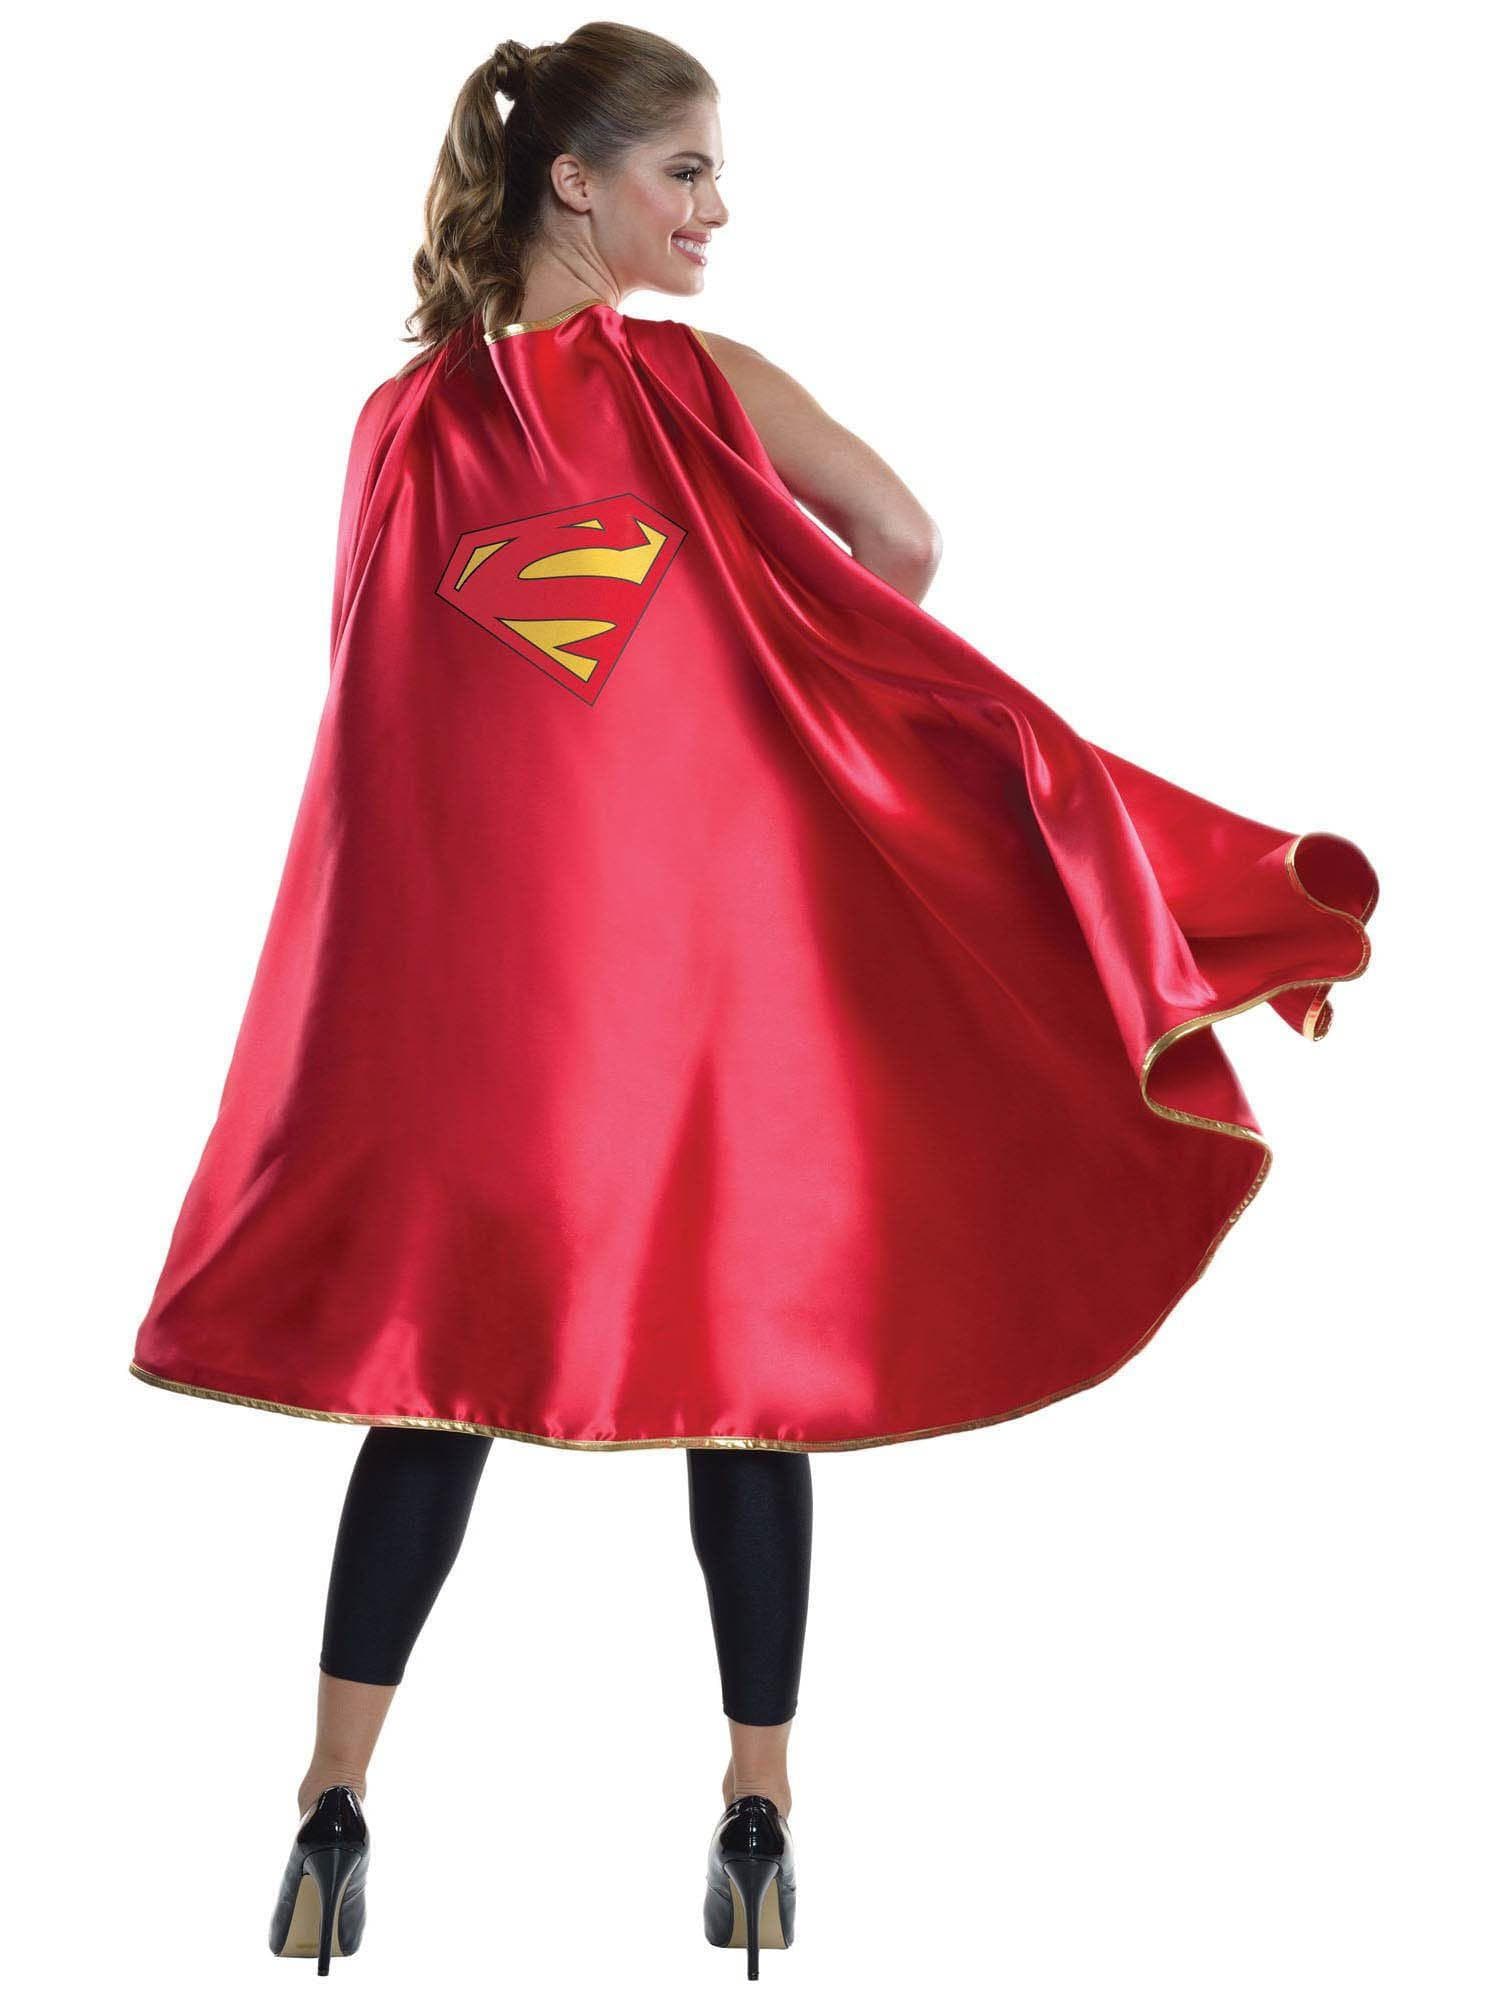 Women's Red with Gold Trim Supergirl Cape - costumes.com